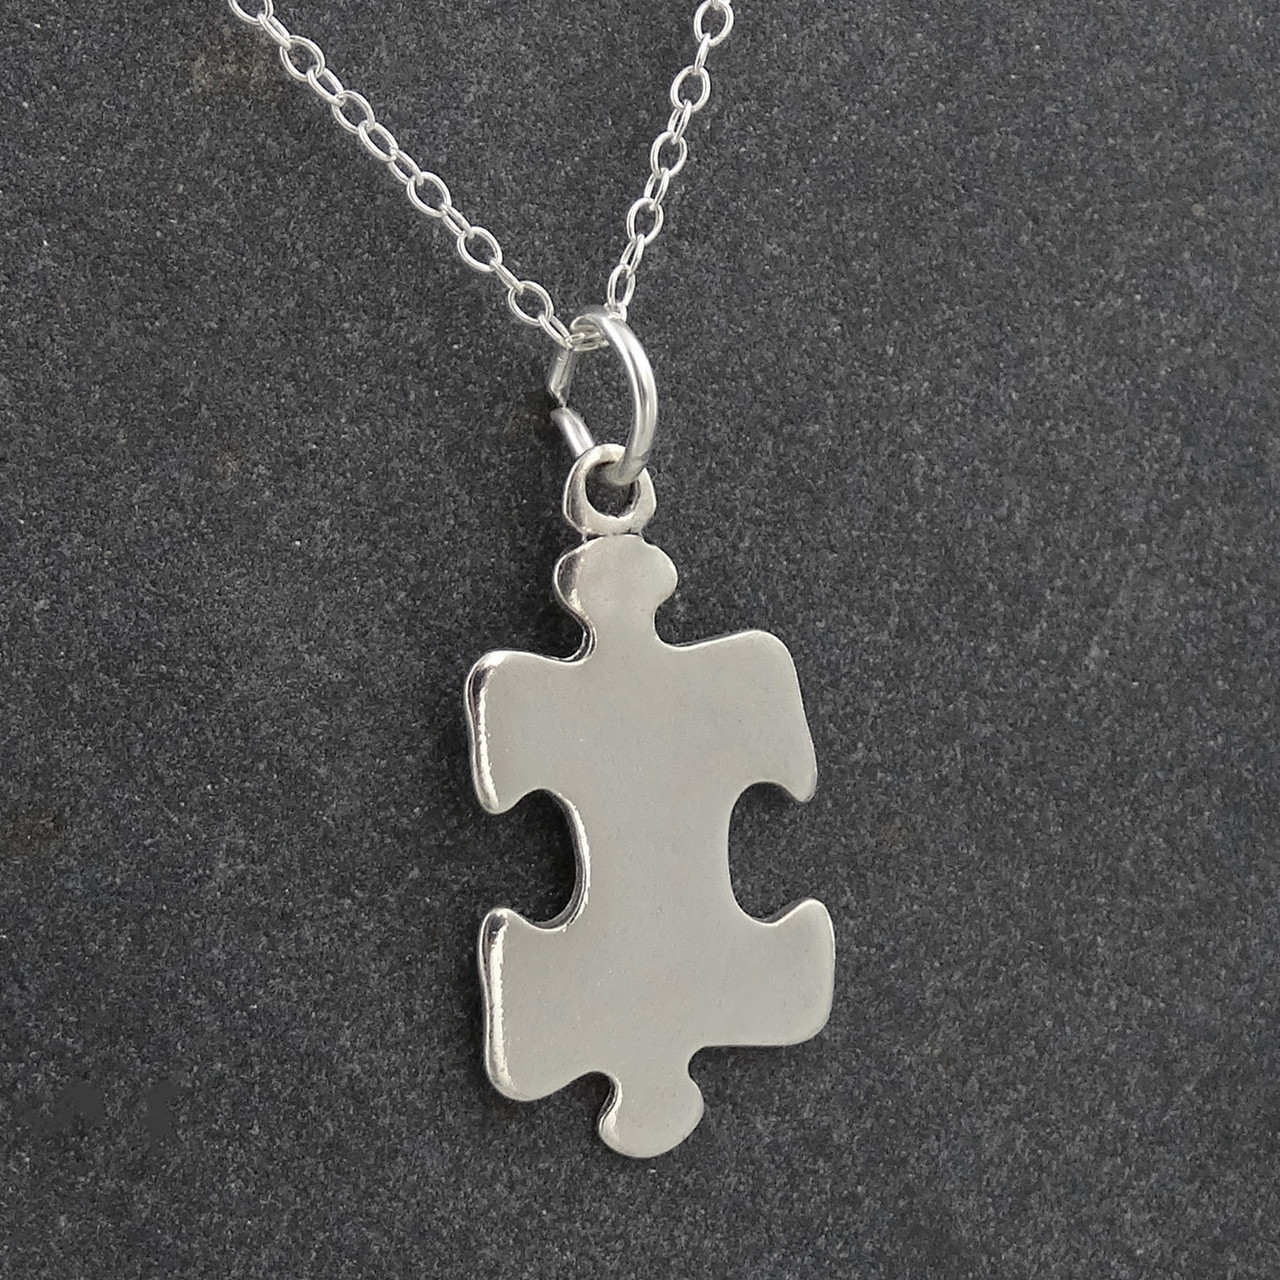 Sterling Silver Puzzle Piece Charm Necklace